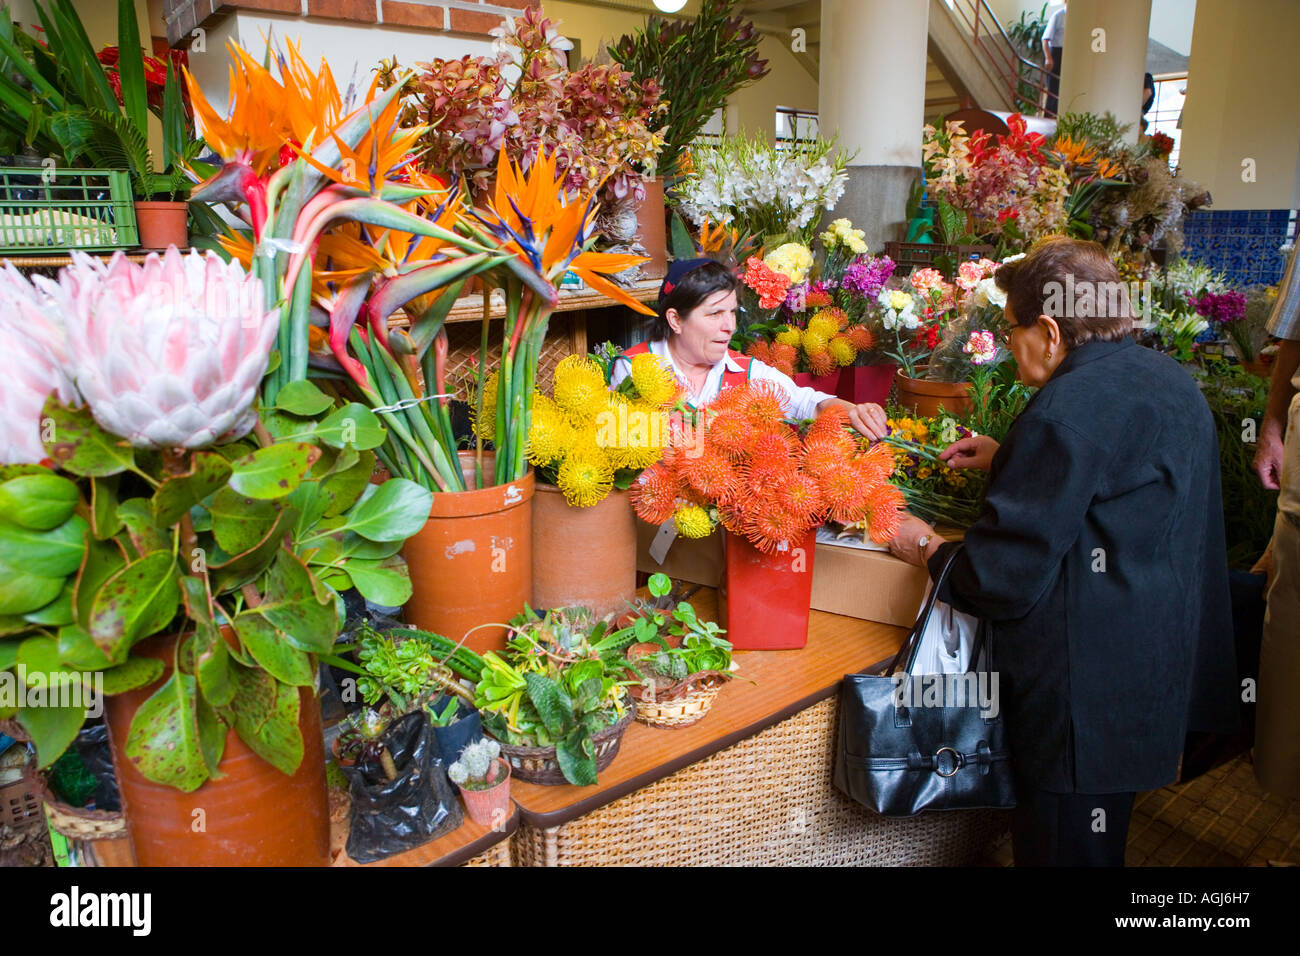 Madeira Funchal Indoor Flower and Fruit Market Stock Photo